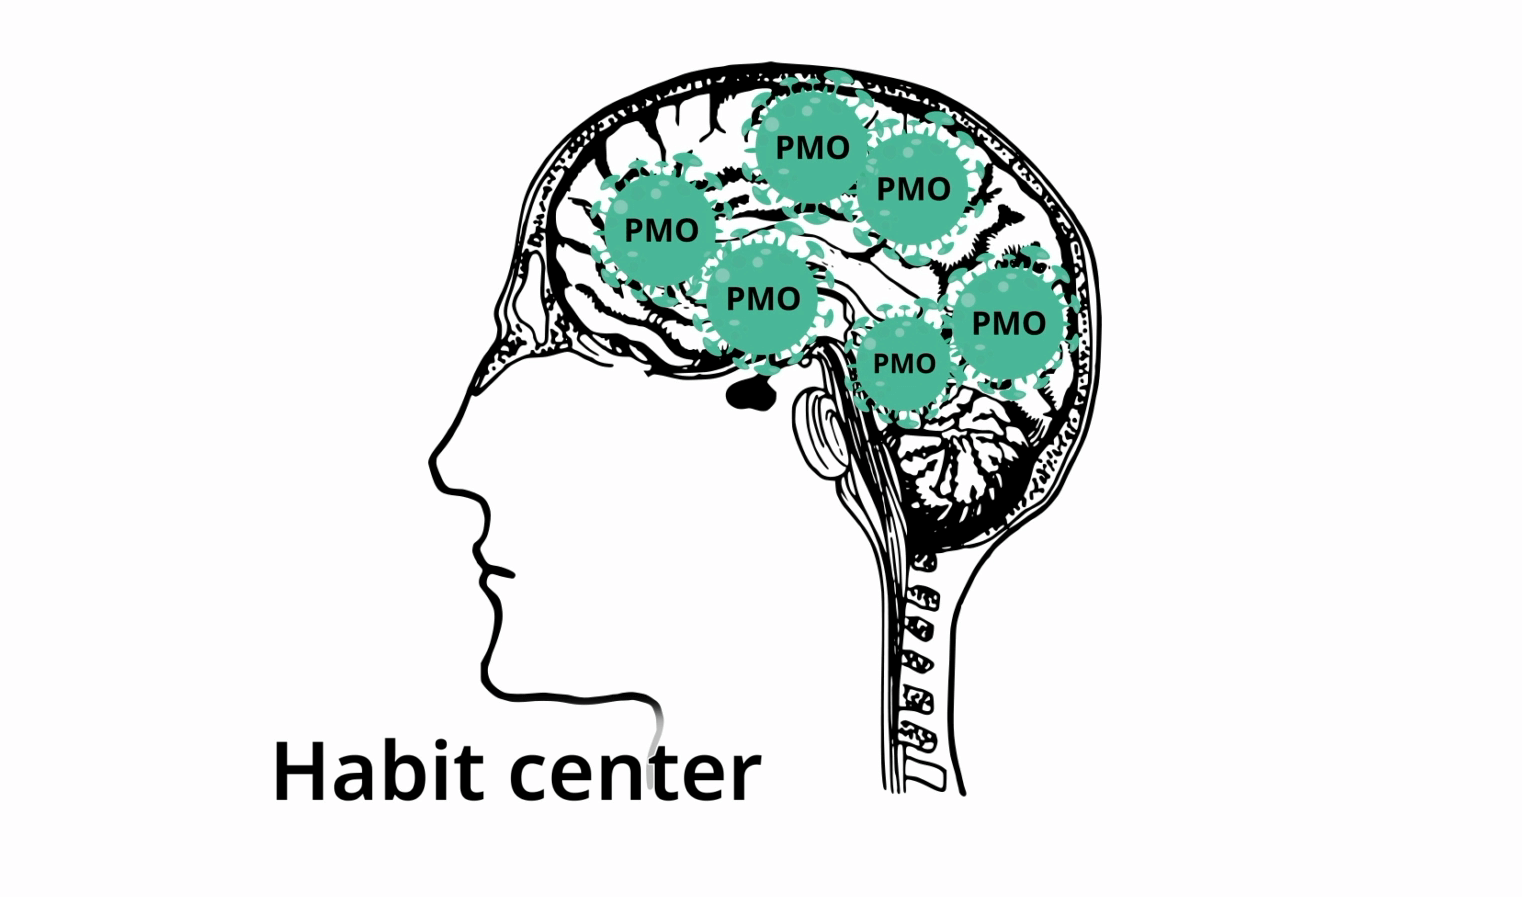 How to Heal Your Brain from Pornography Use - Habit center PMO virus